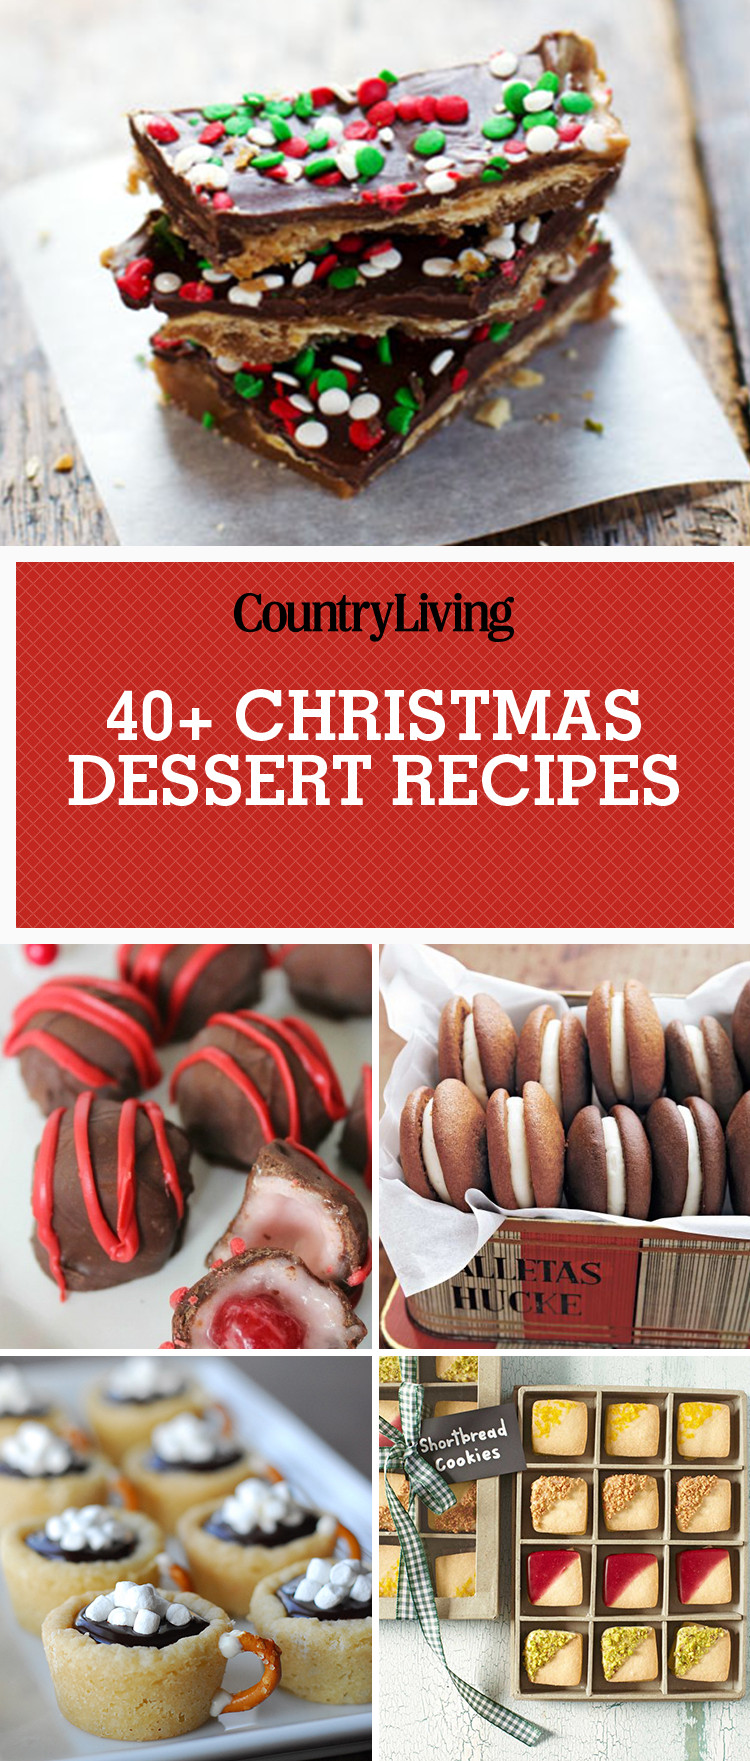 Easy Holiday Desserts For Parties
 45 Easy Christmas Desserts Best Recipes and Ideas for